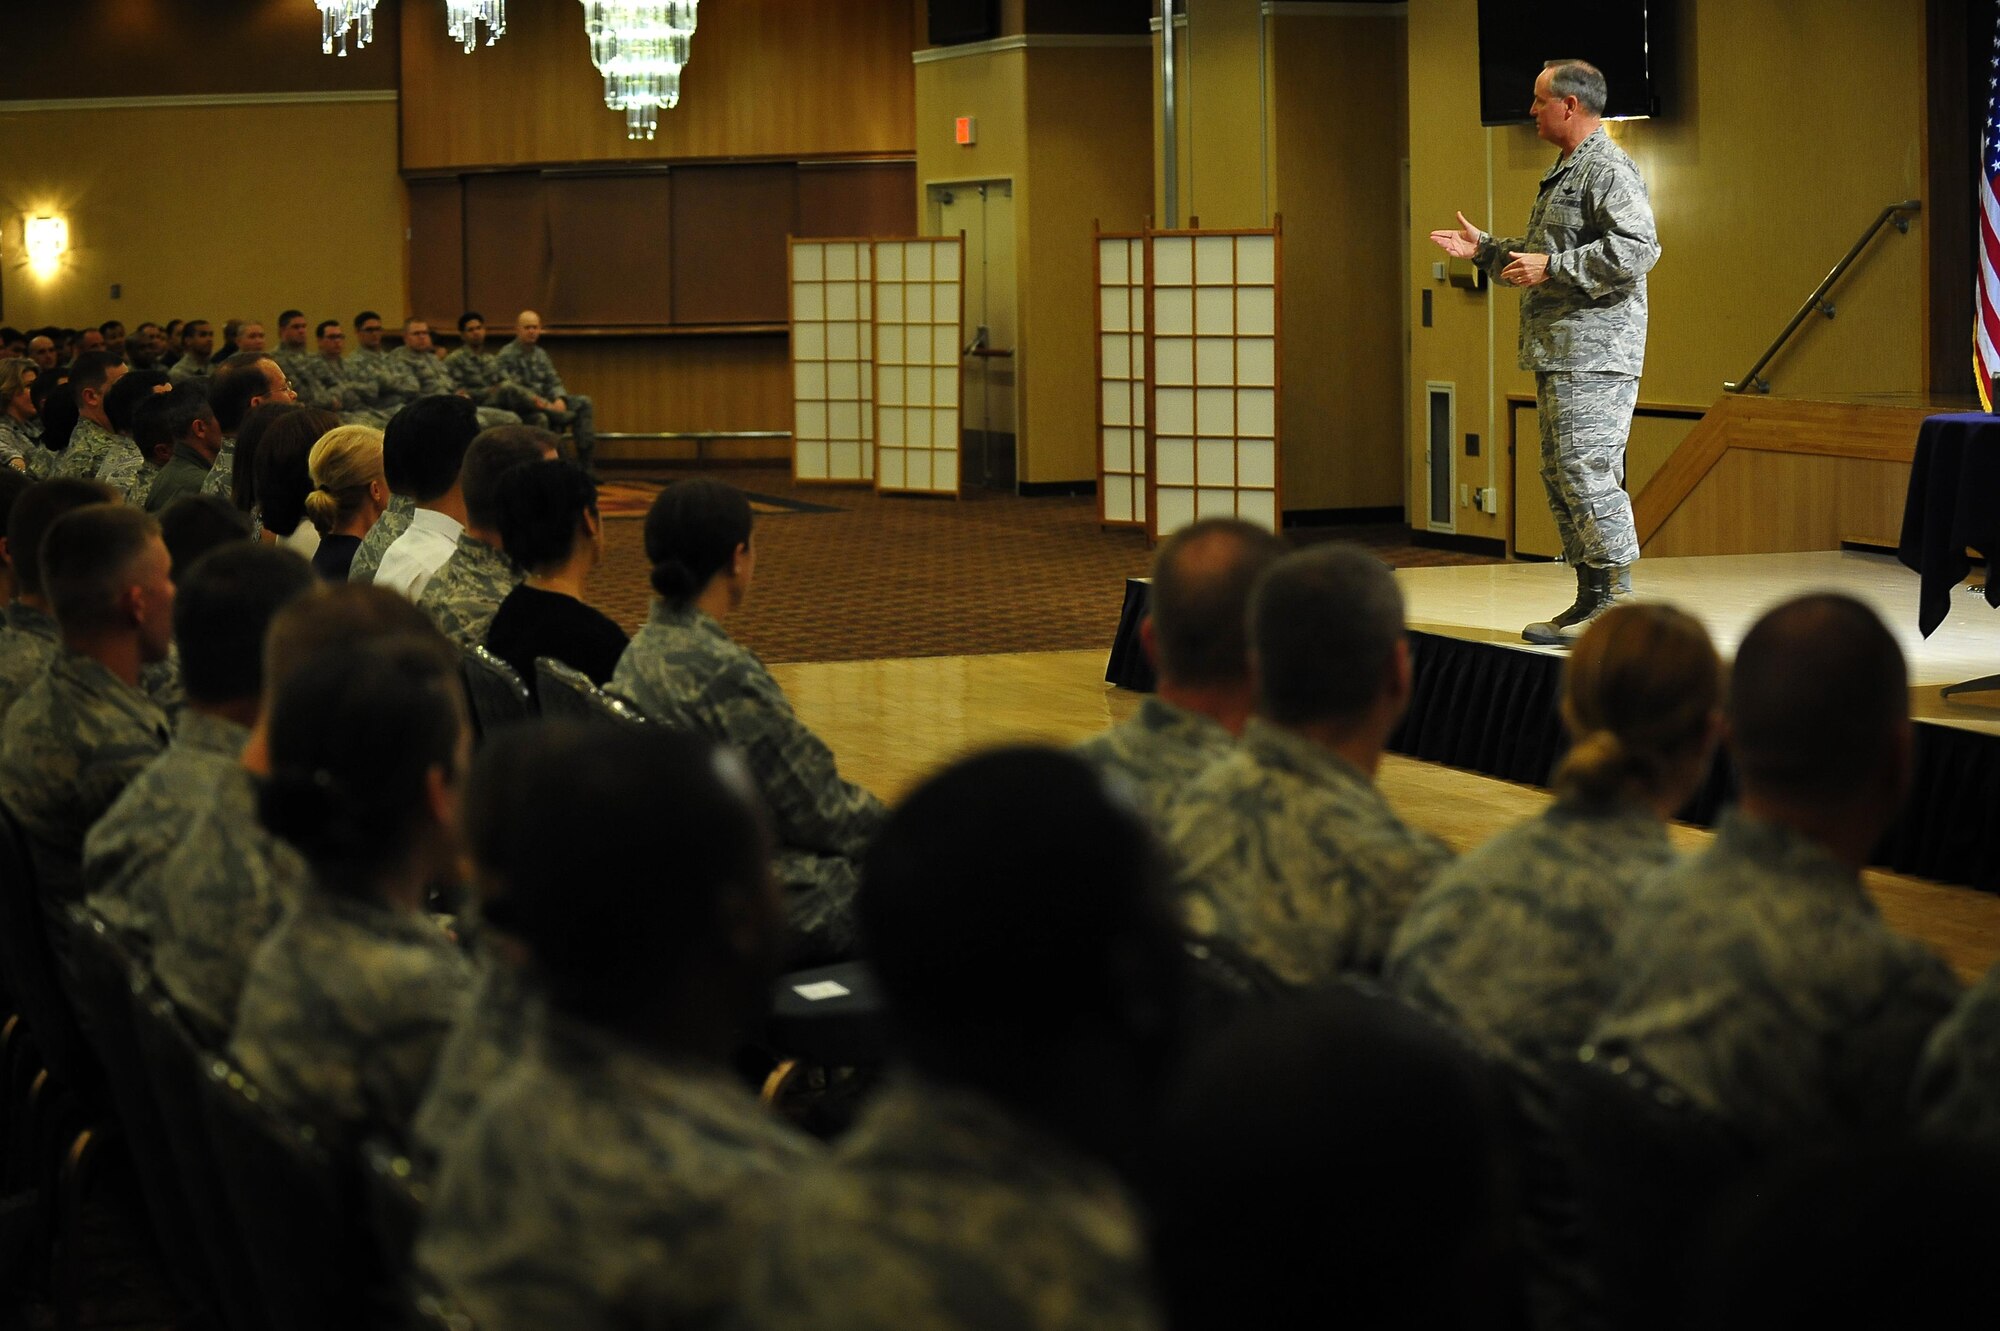 Air Force Chief of Staff Gen. Mark A. Welsh III addresses the audience during an Airman’s call Aug. 28, 2013, at Misawa Air Base, Japan. As part of a two-week tour to the Pacific, Welsh visited Misawa to talk about the current state of the Air Force and thank Airmen and their families for their service and dedicated support. (U.S. Air Force photo/Staff Sgt. Nathan Lipscomb) 